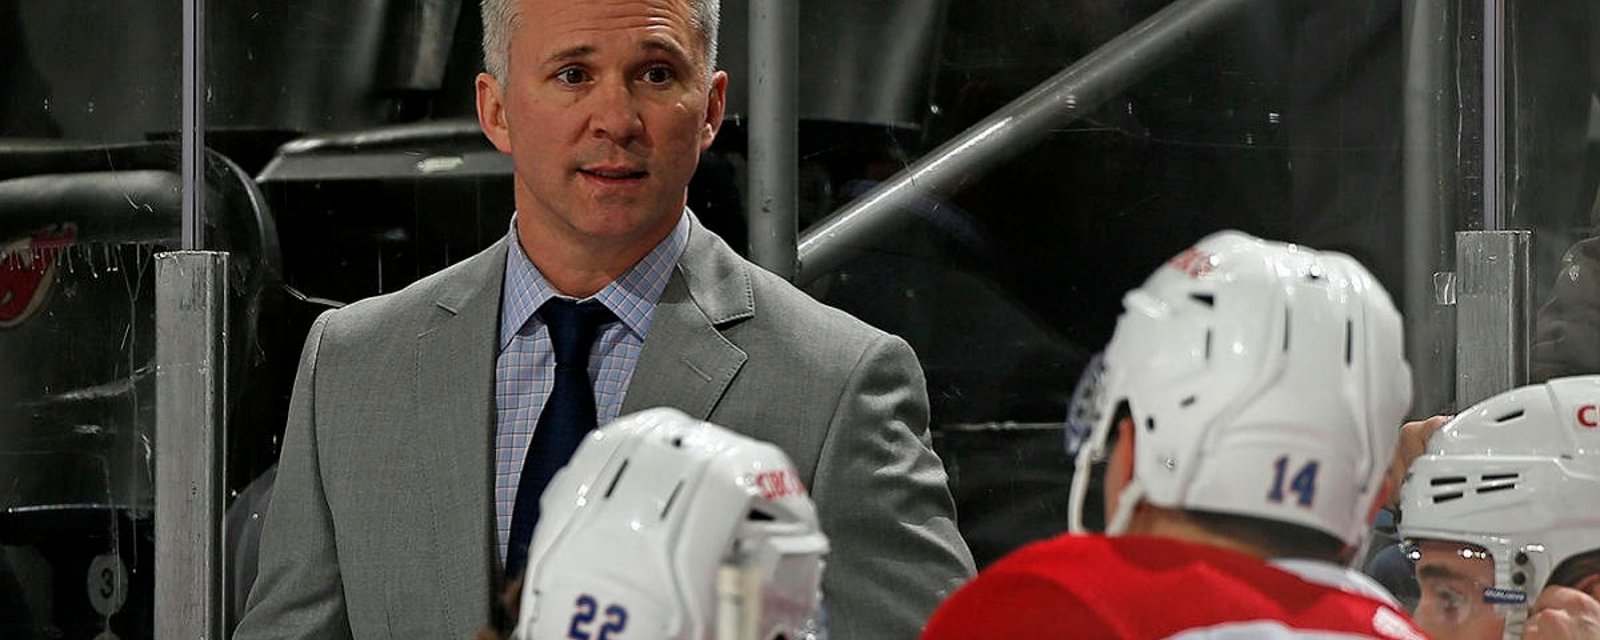 Habs player leaks details about Martin St. Louis' absence.